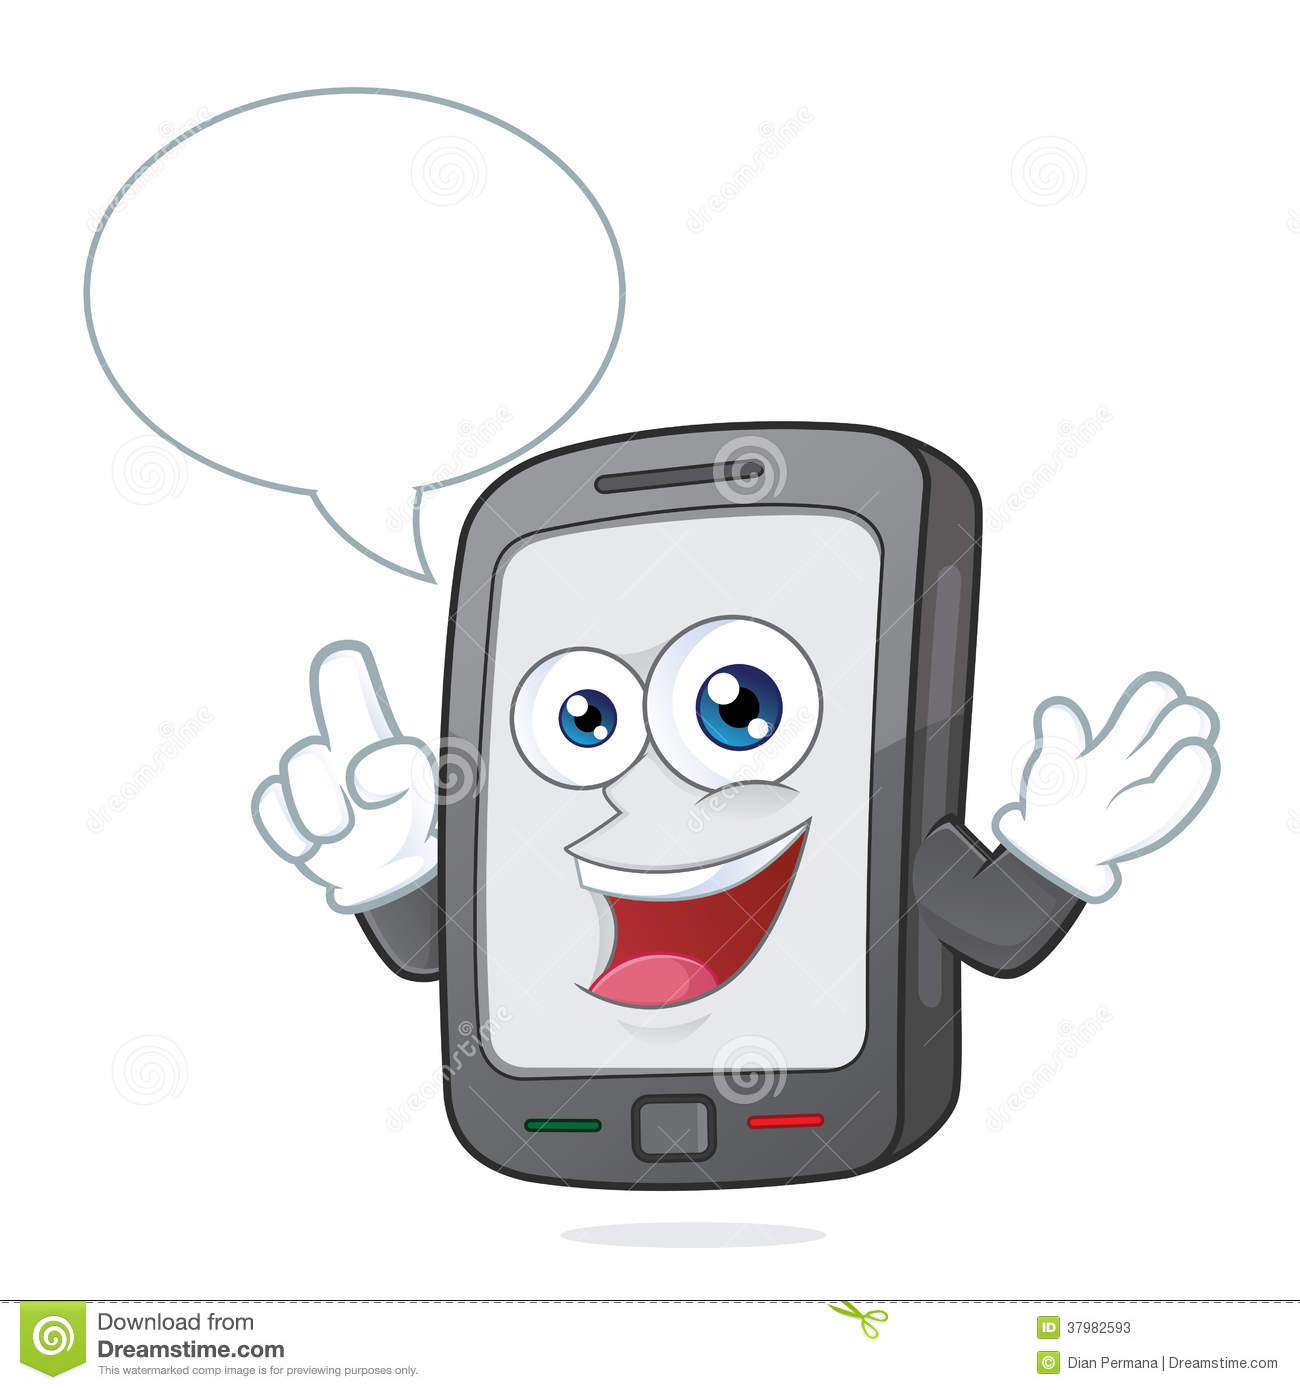 Clipart Picture Of A Smartphone Cartoon Character Talking With Speech